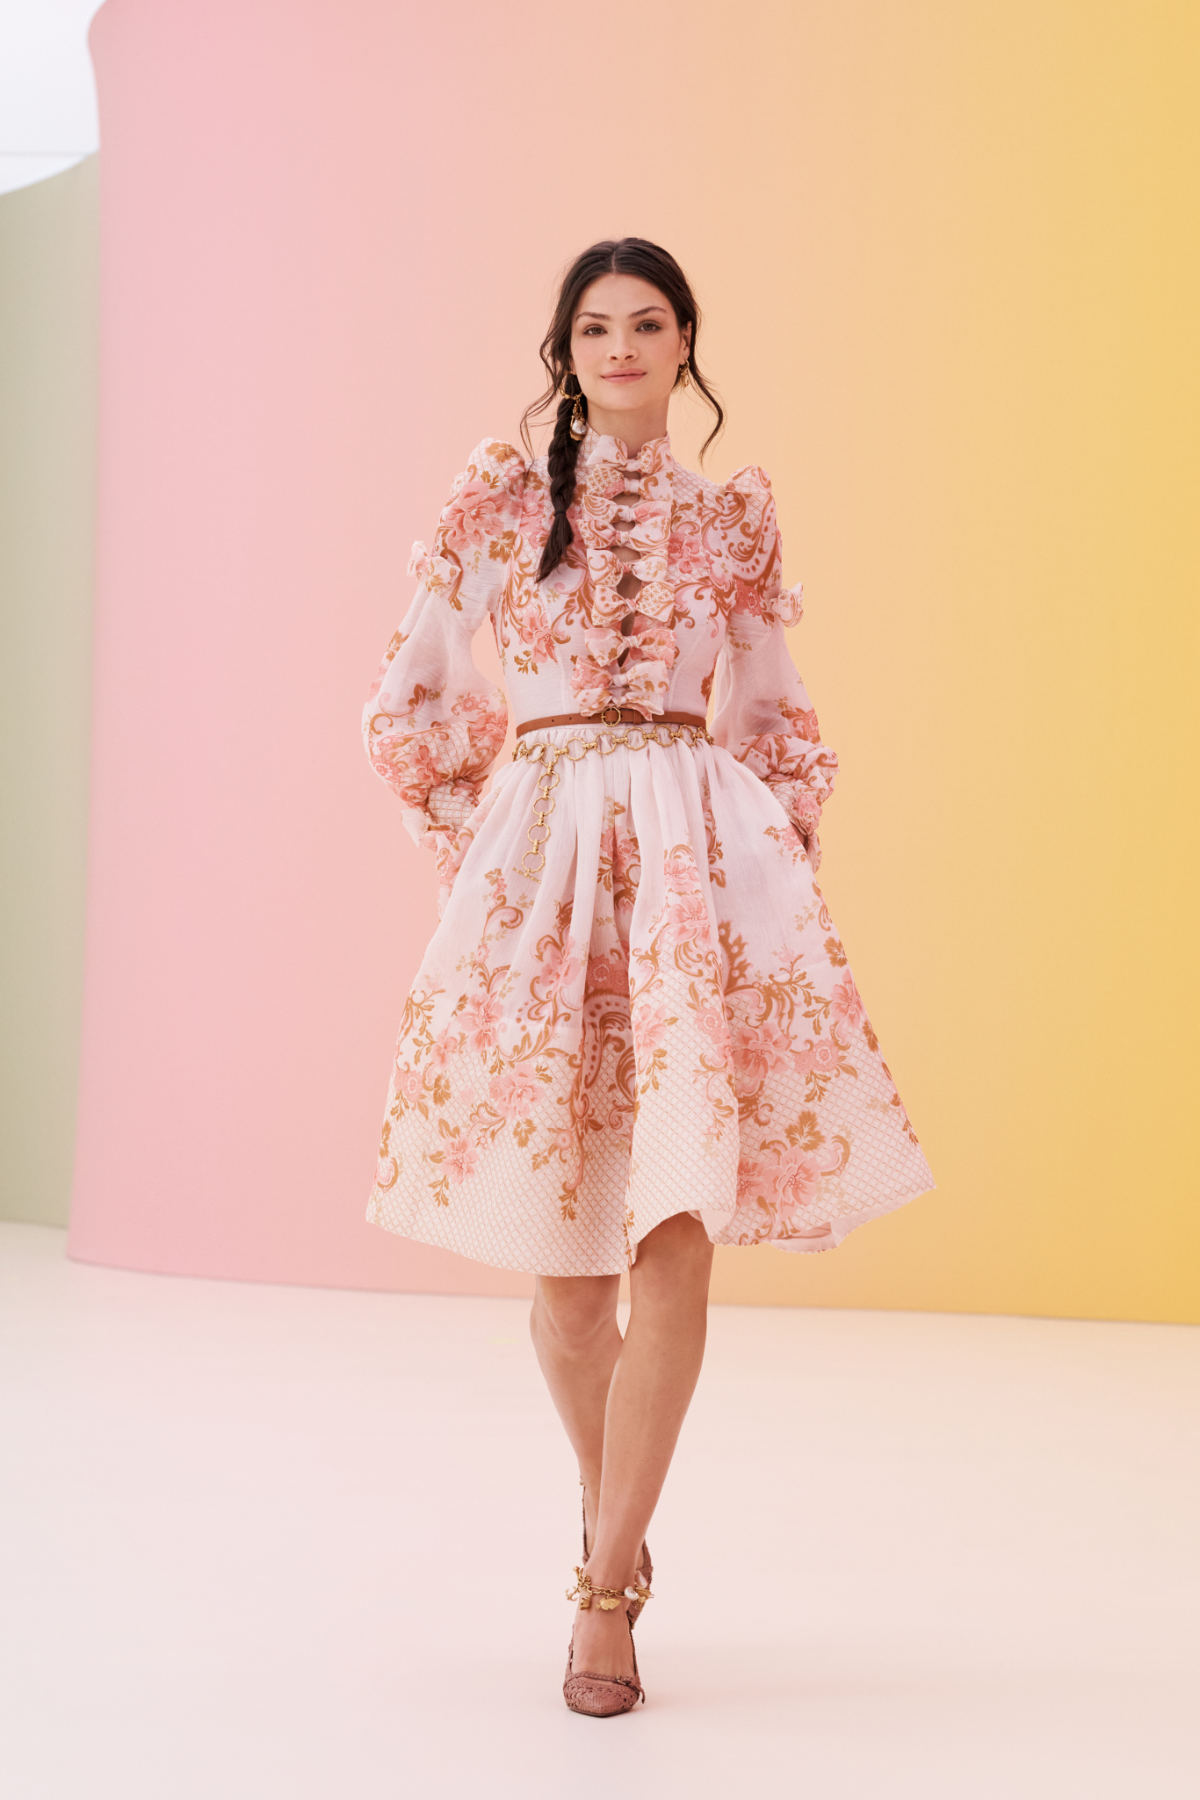 The New Zimmermann Resort 2022 Collection